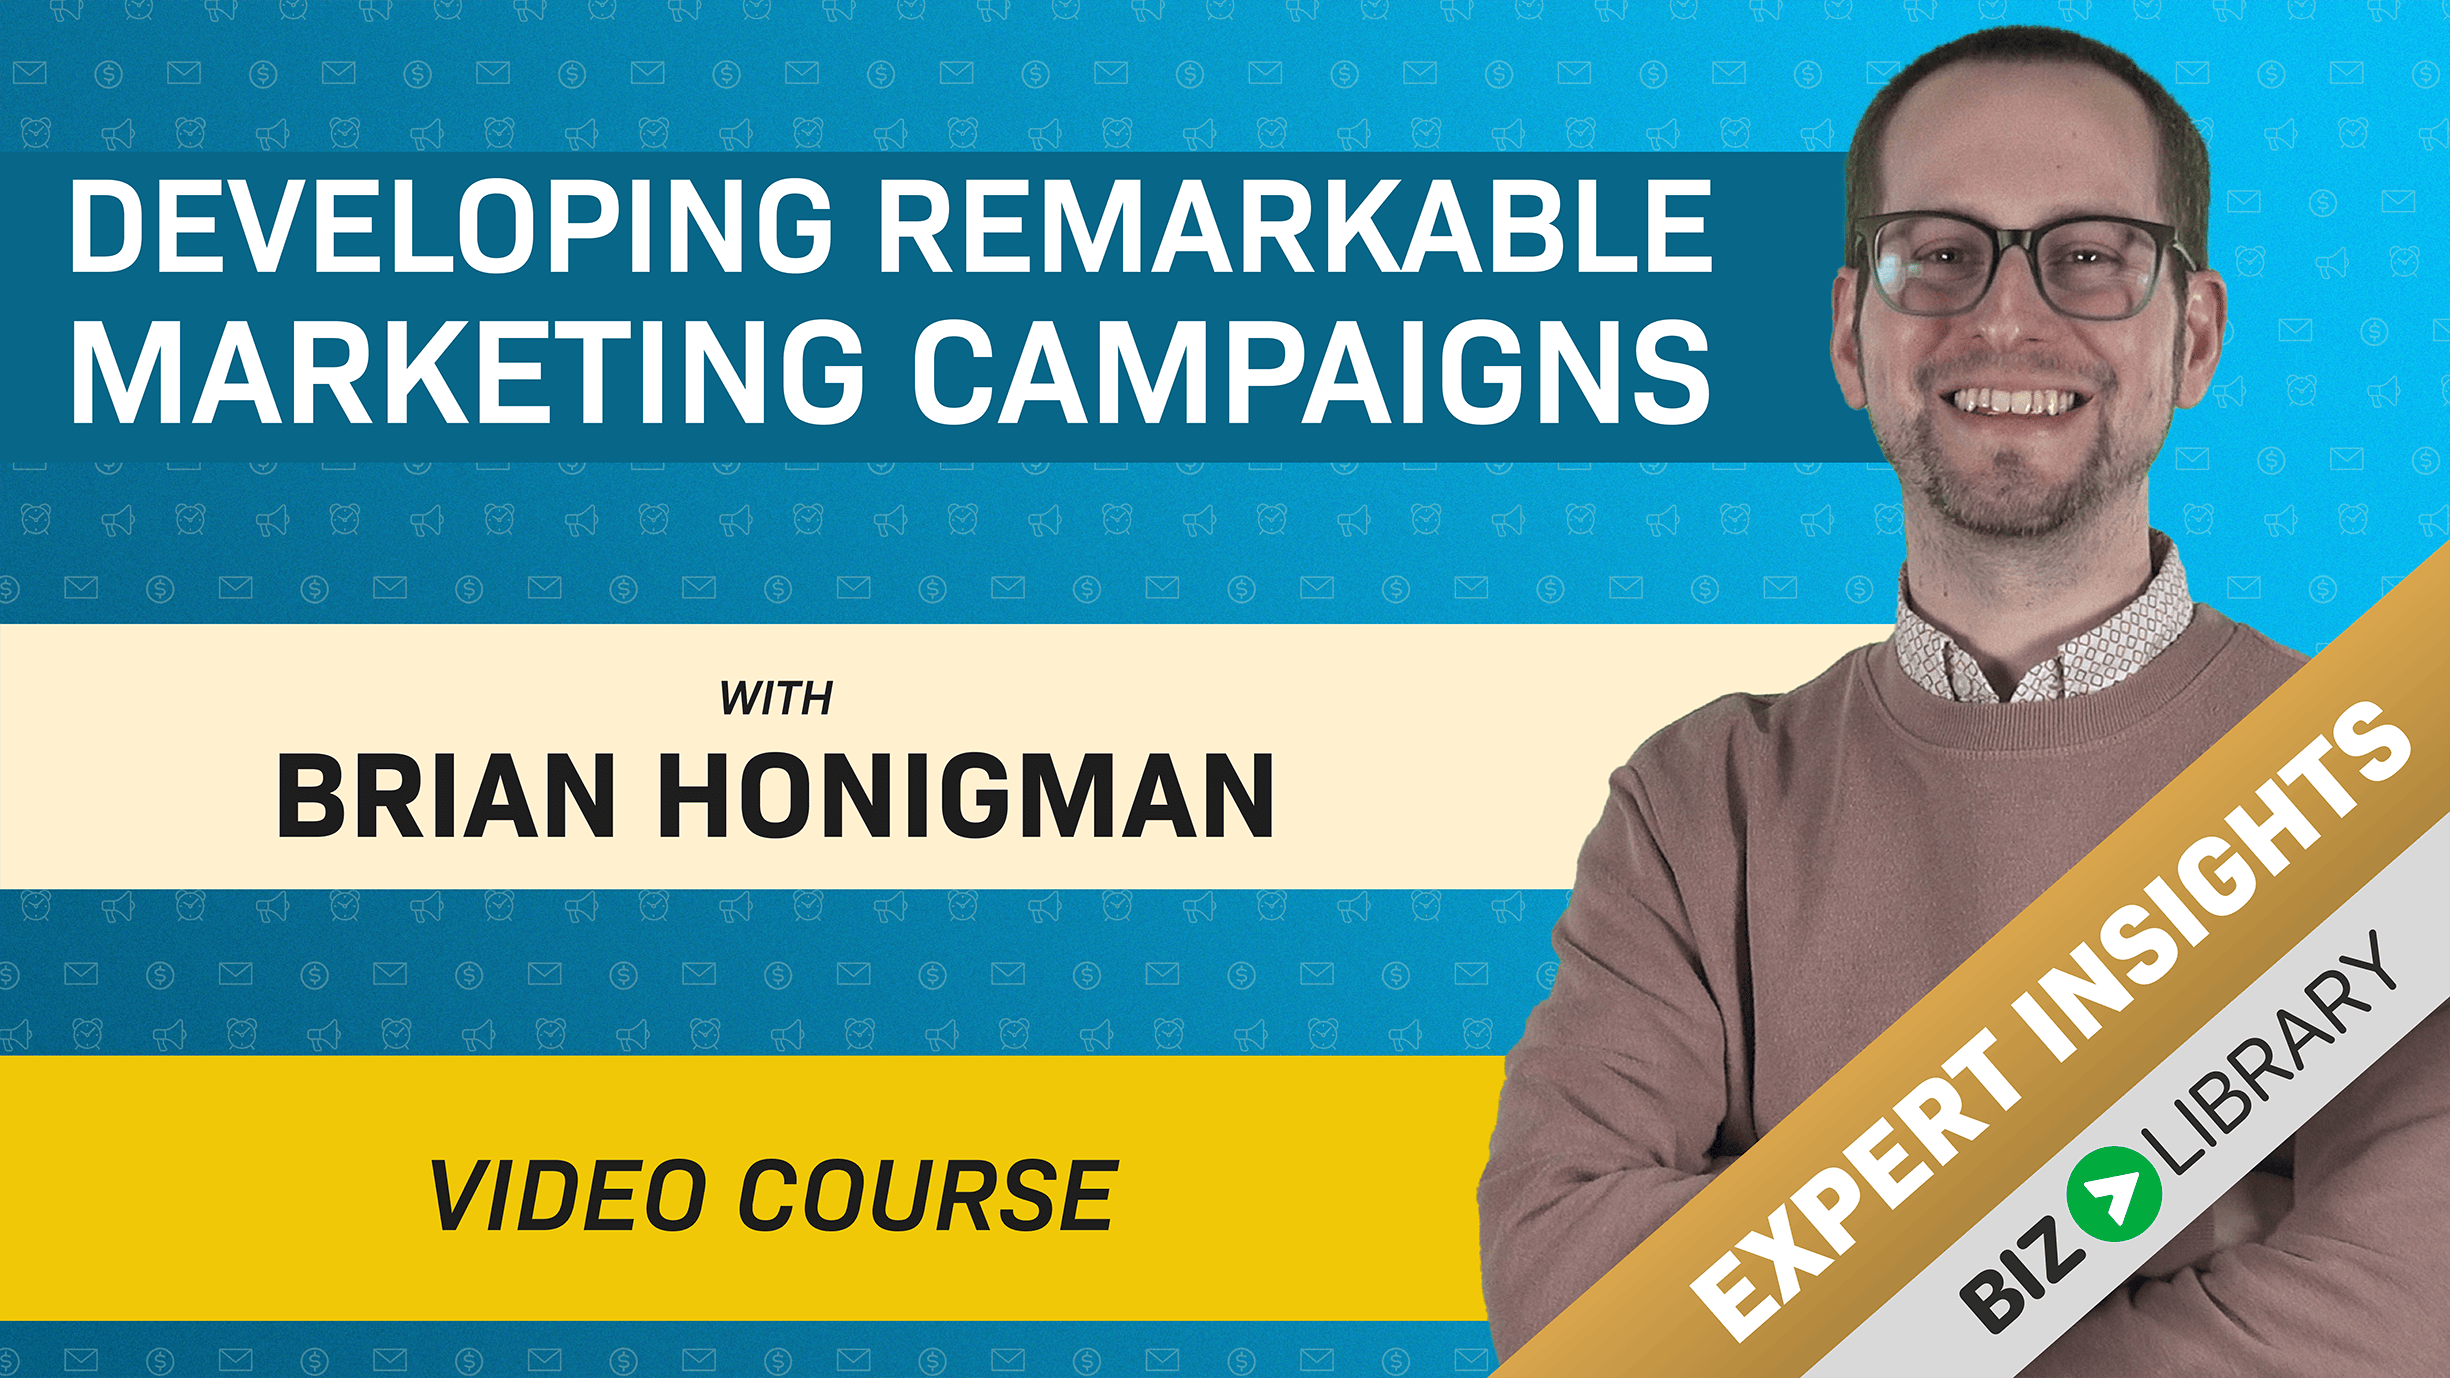 Developing Remarkable Marketing Campaigns Course